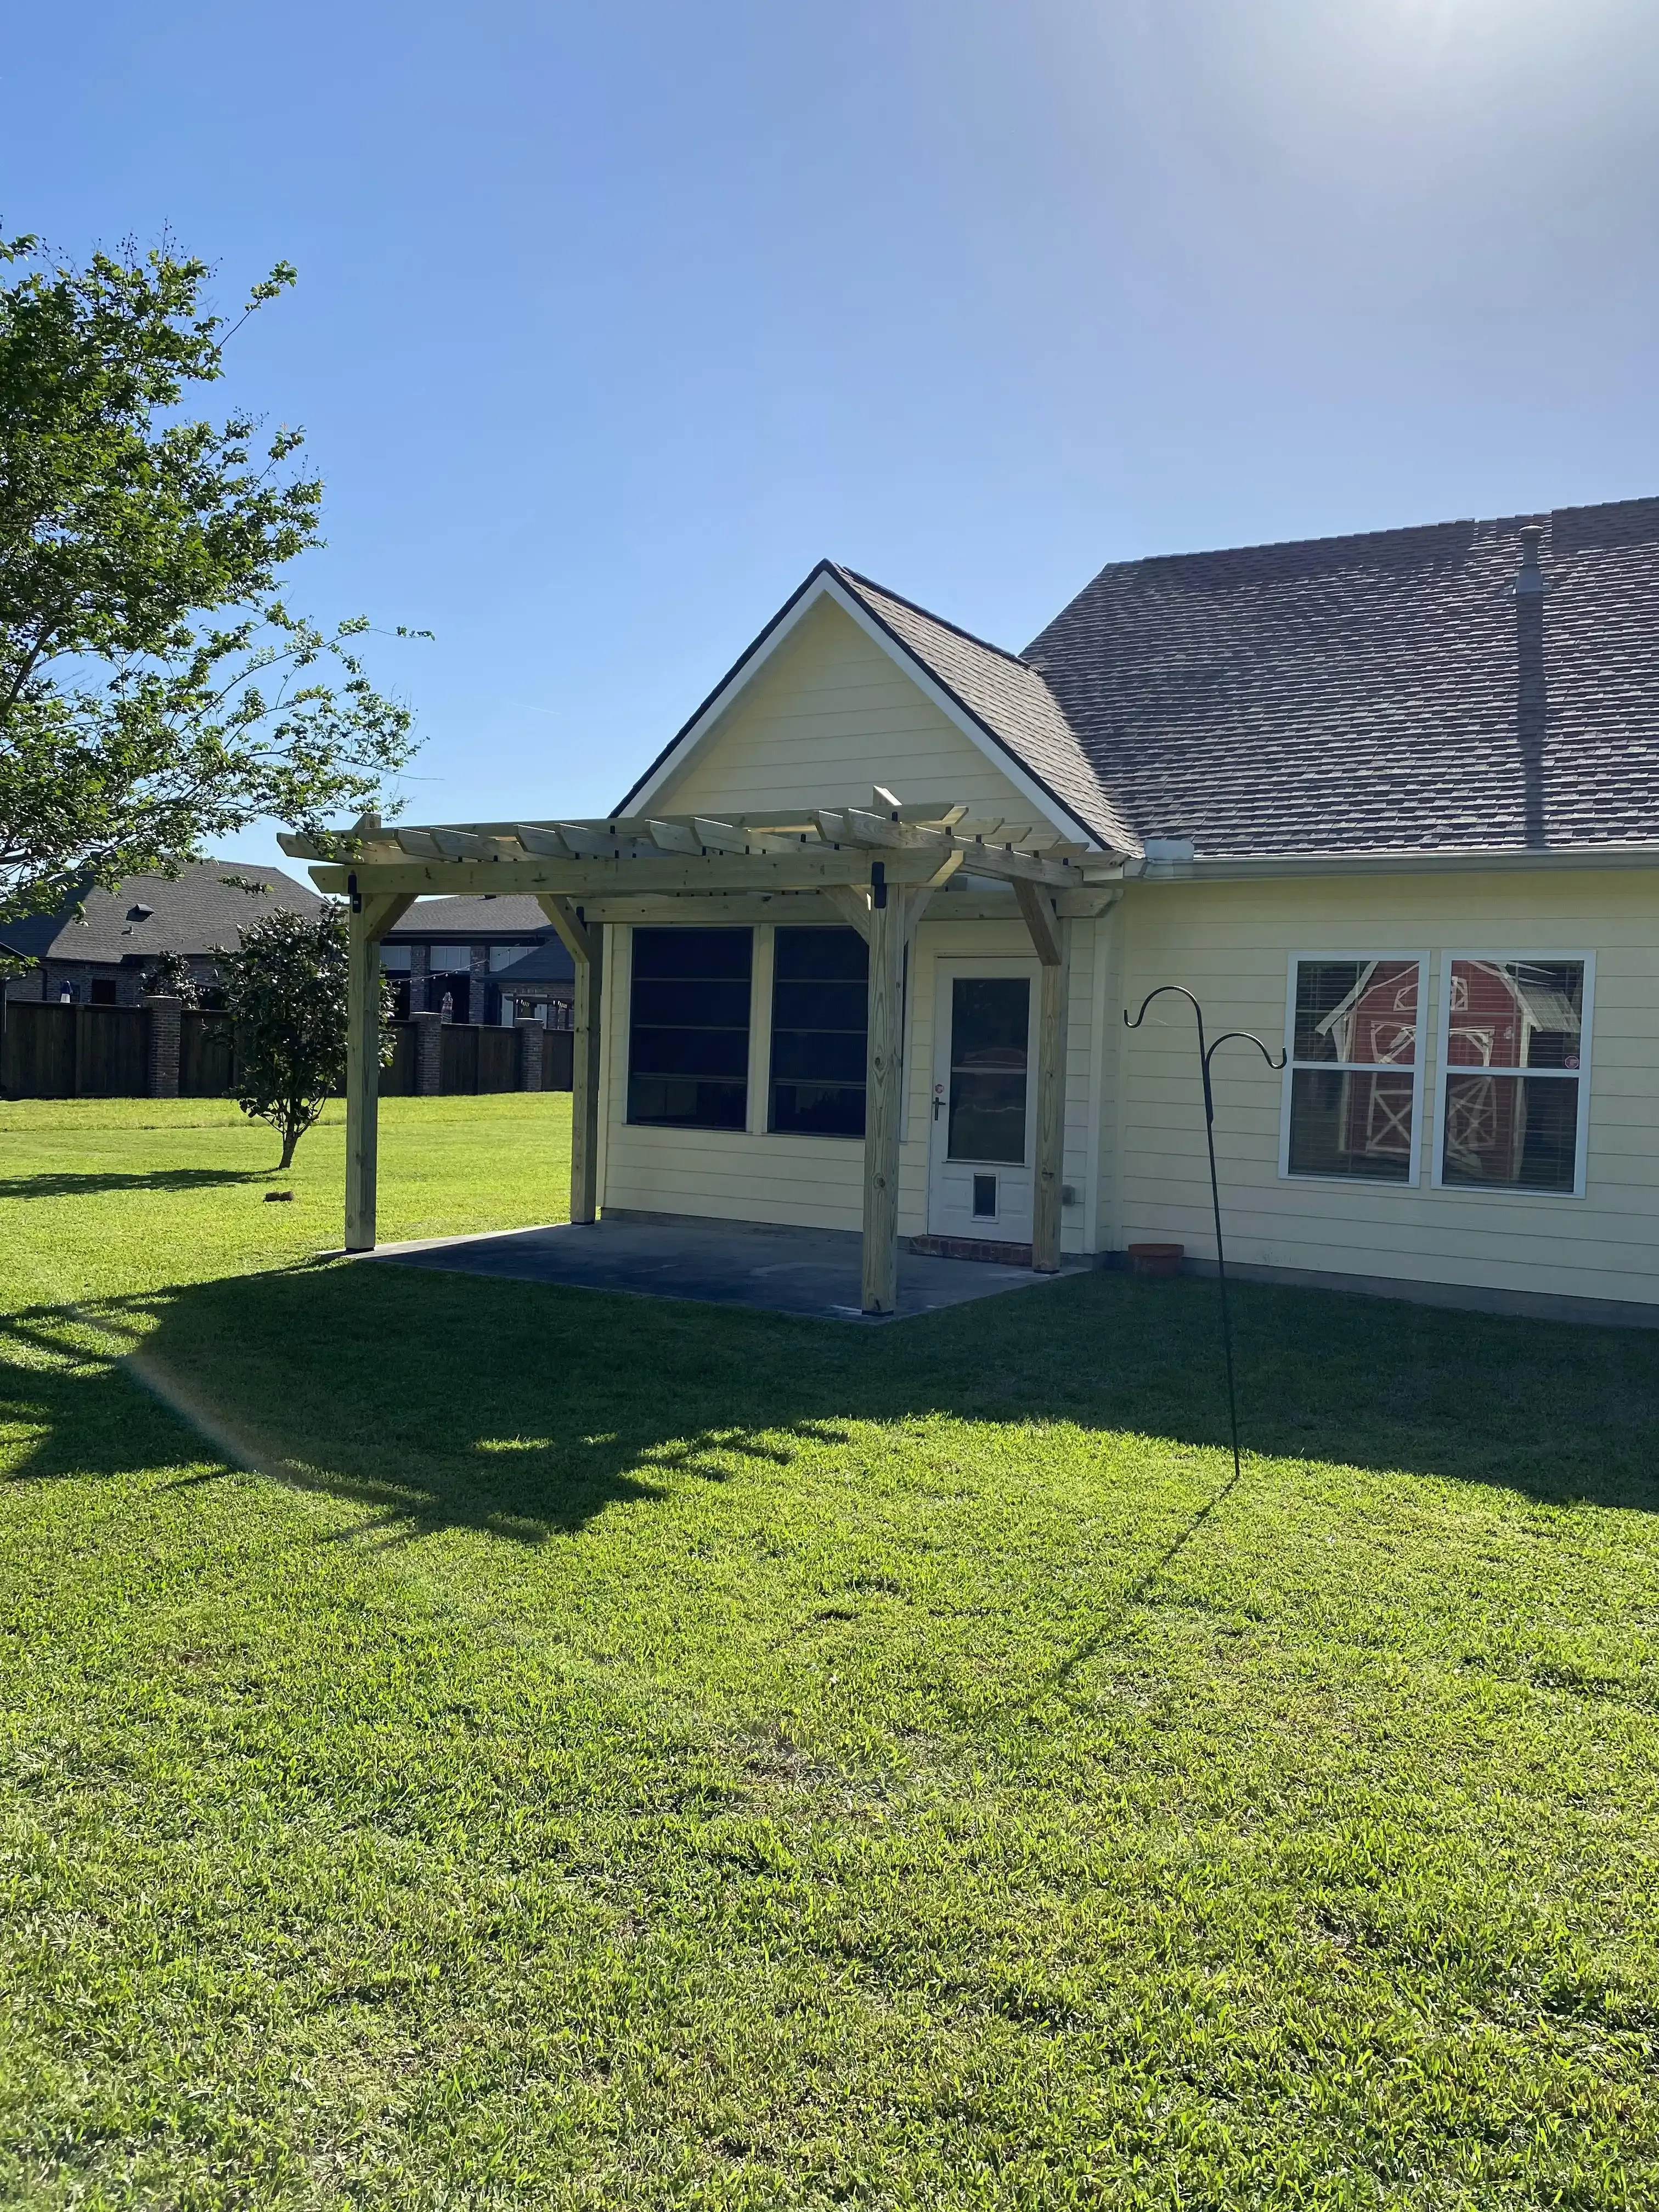 Exterior for Primeaux's Handyman Services in Youngsville, Louisiana